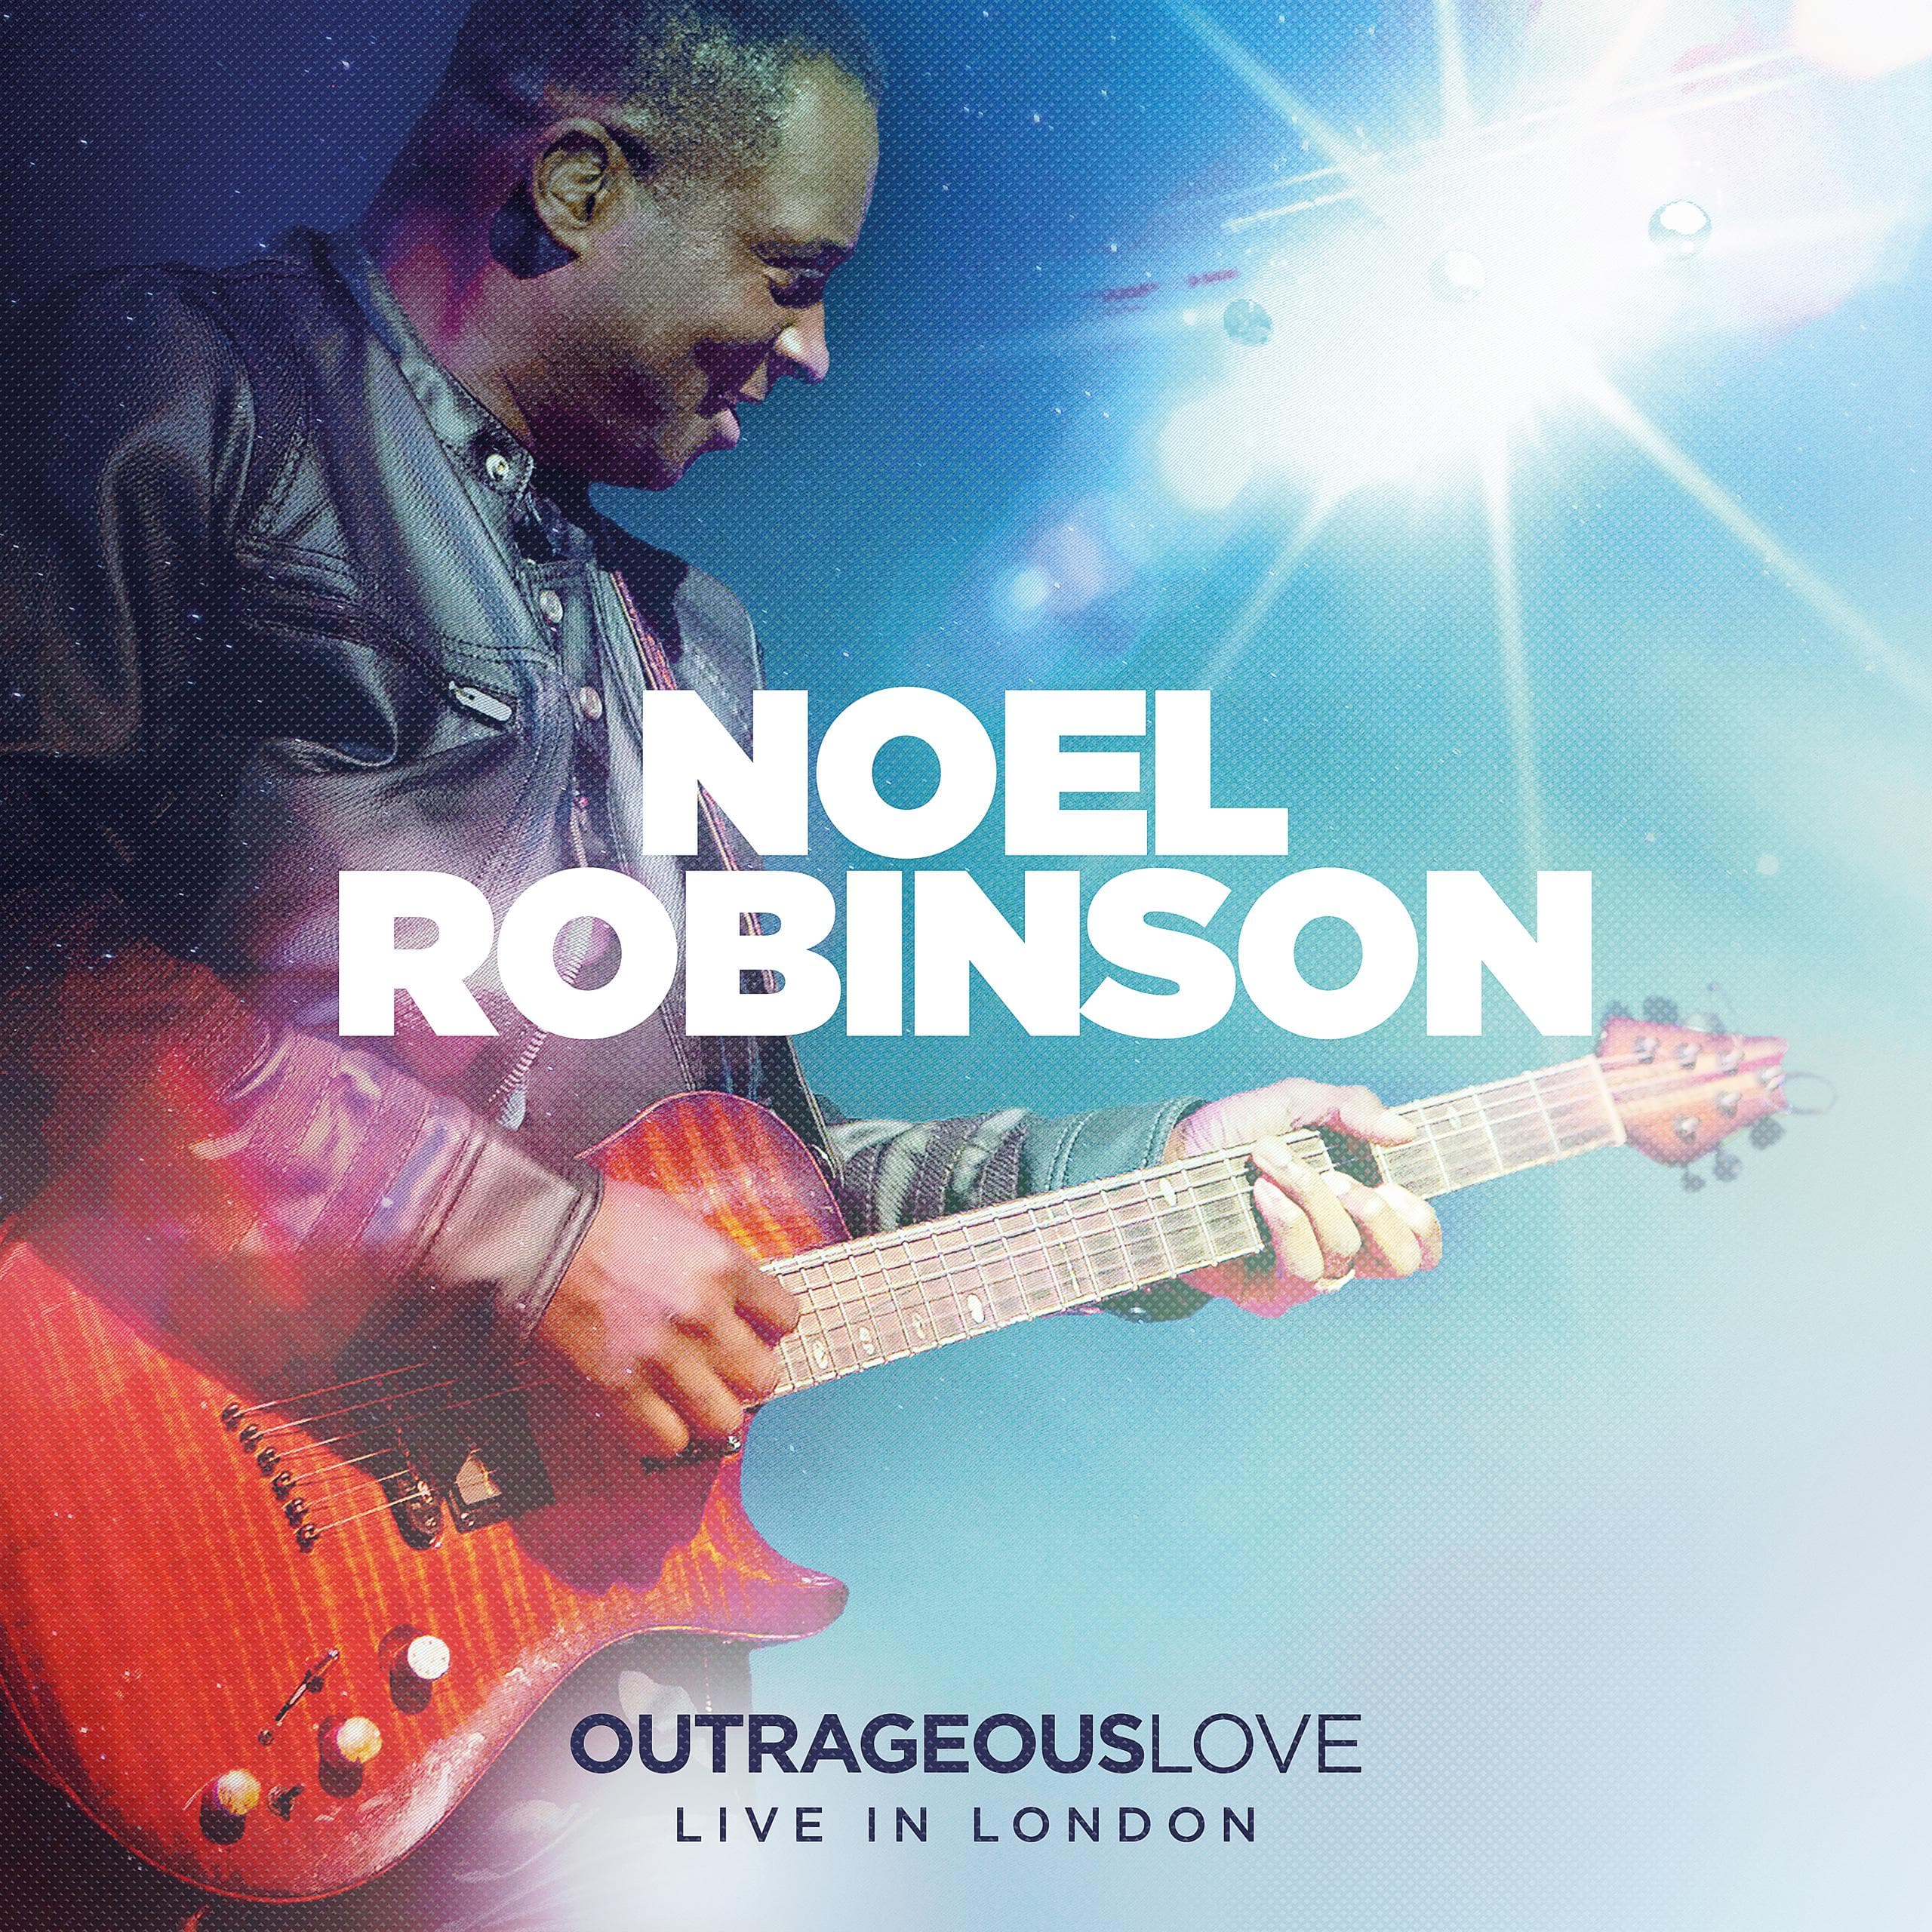 Noel Robinson Outrageous Love Full Album Chord Charts